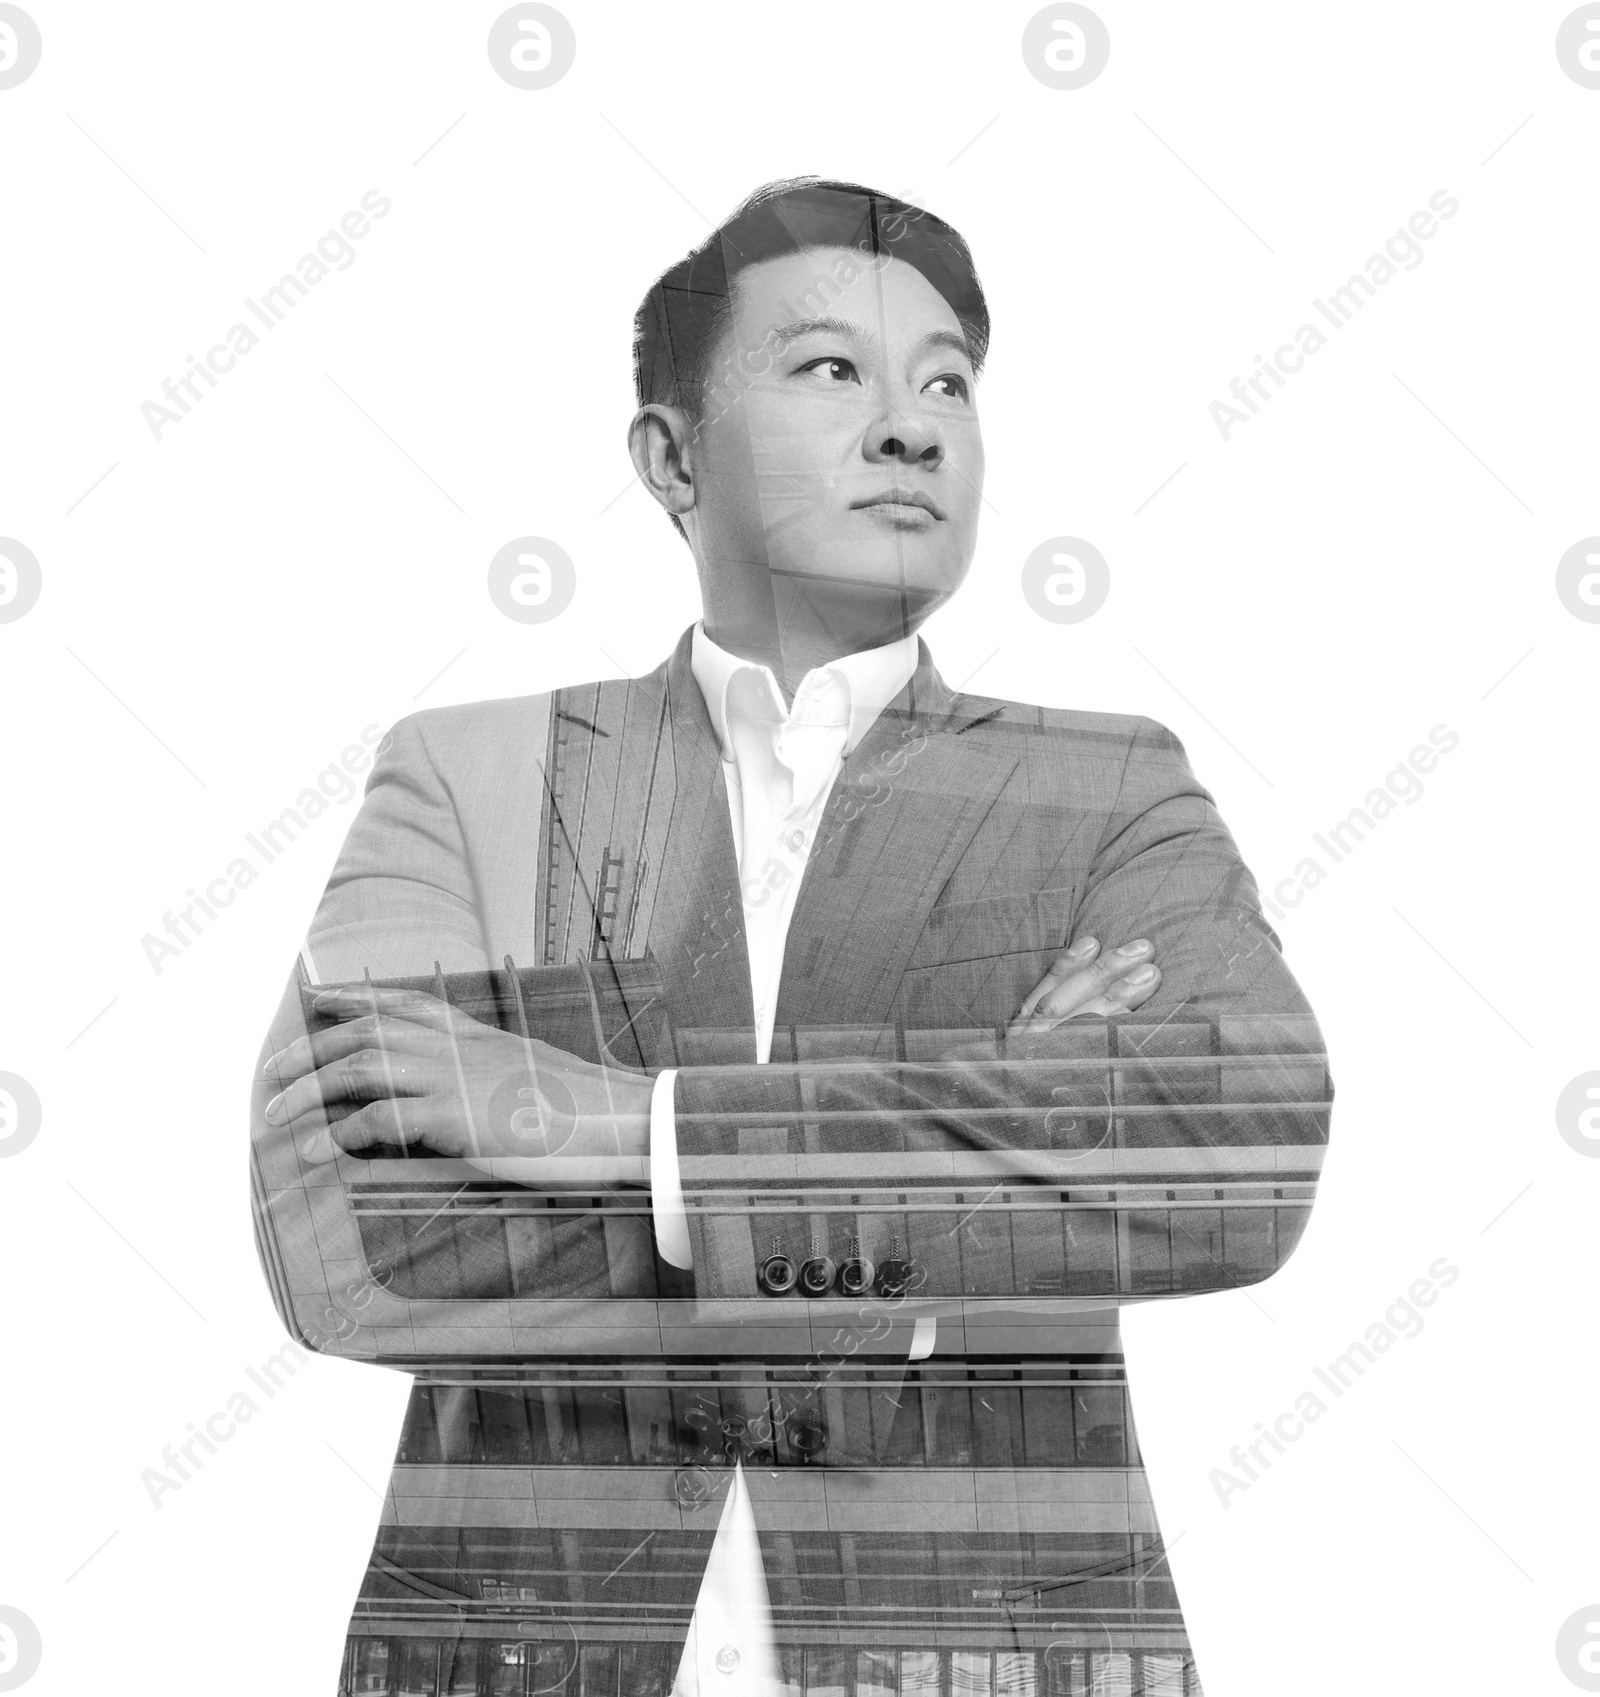 Image of Double exposure of businessman and office buildings